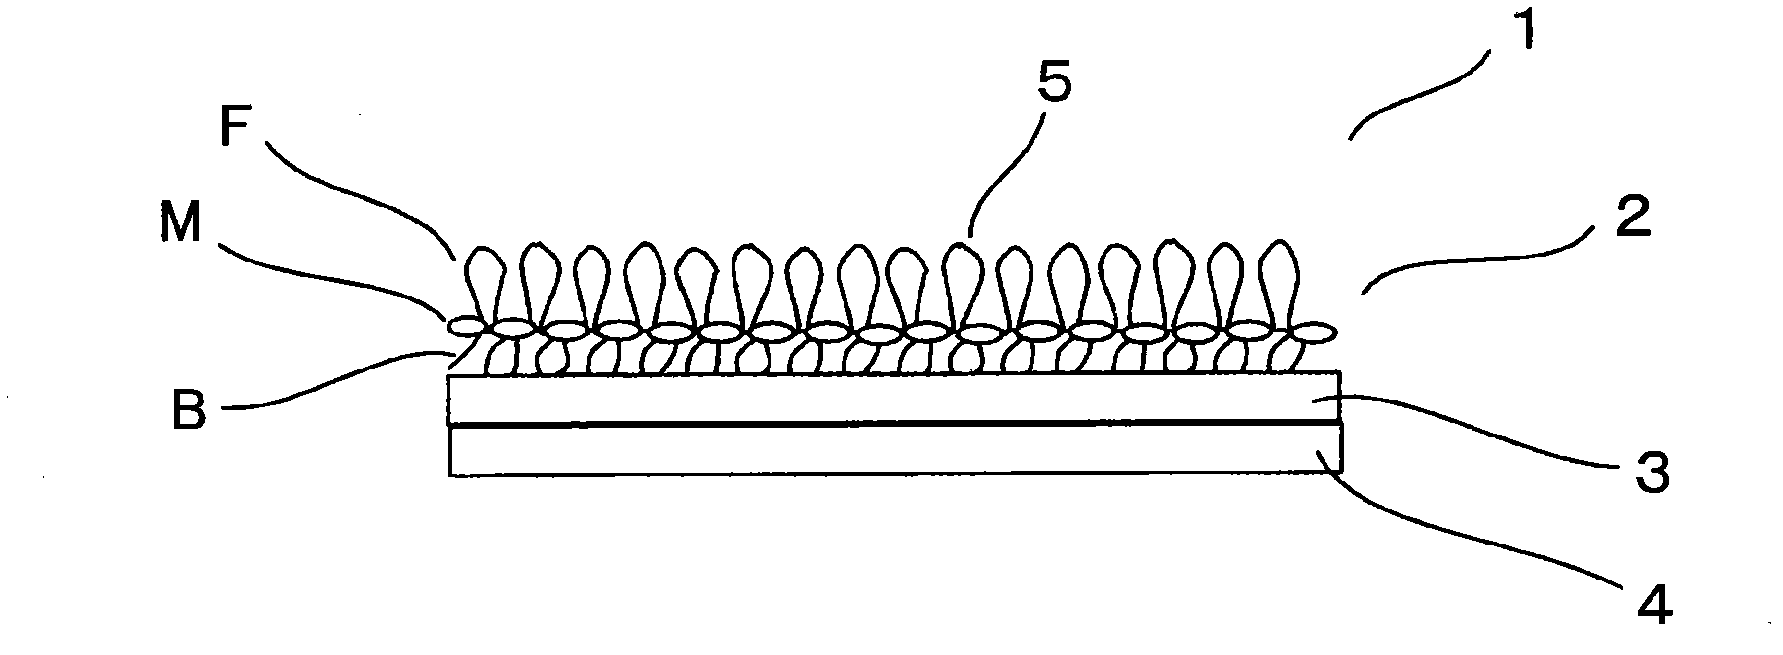 Knitted Fabric For Hook-and-loop Fastener